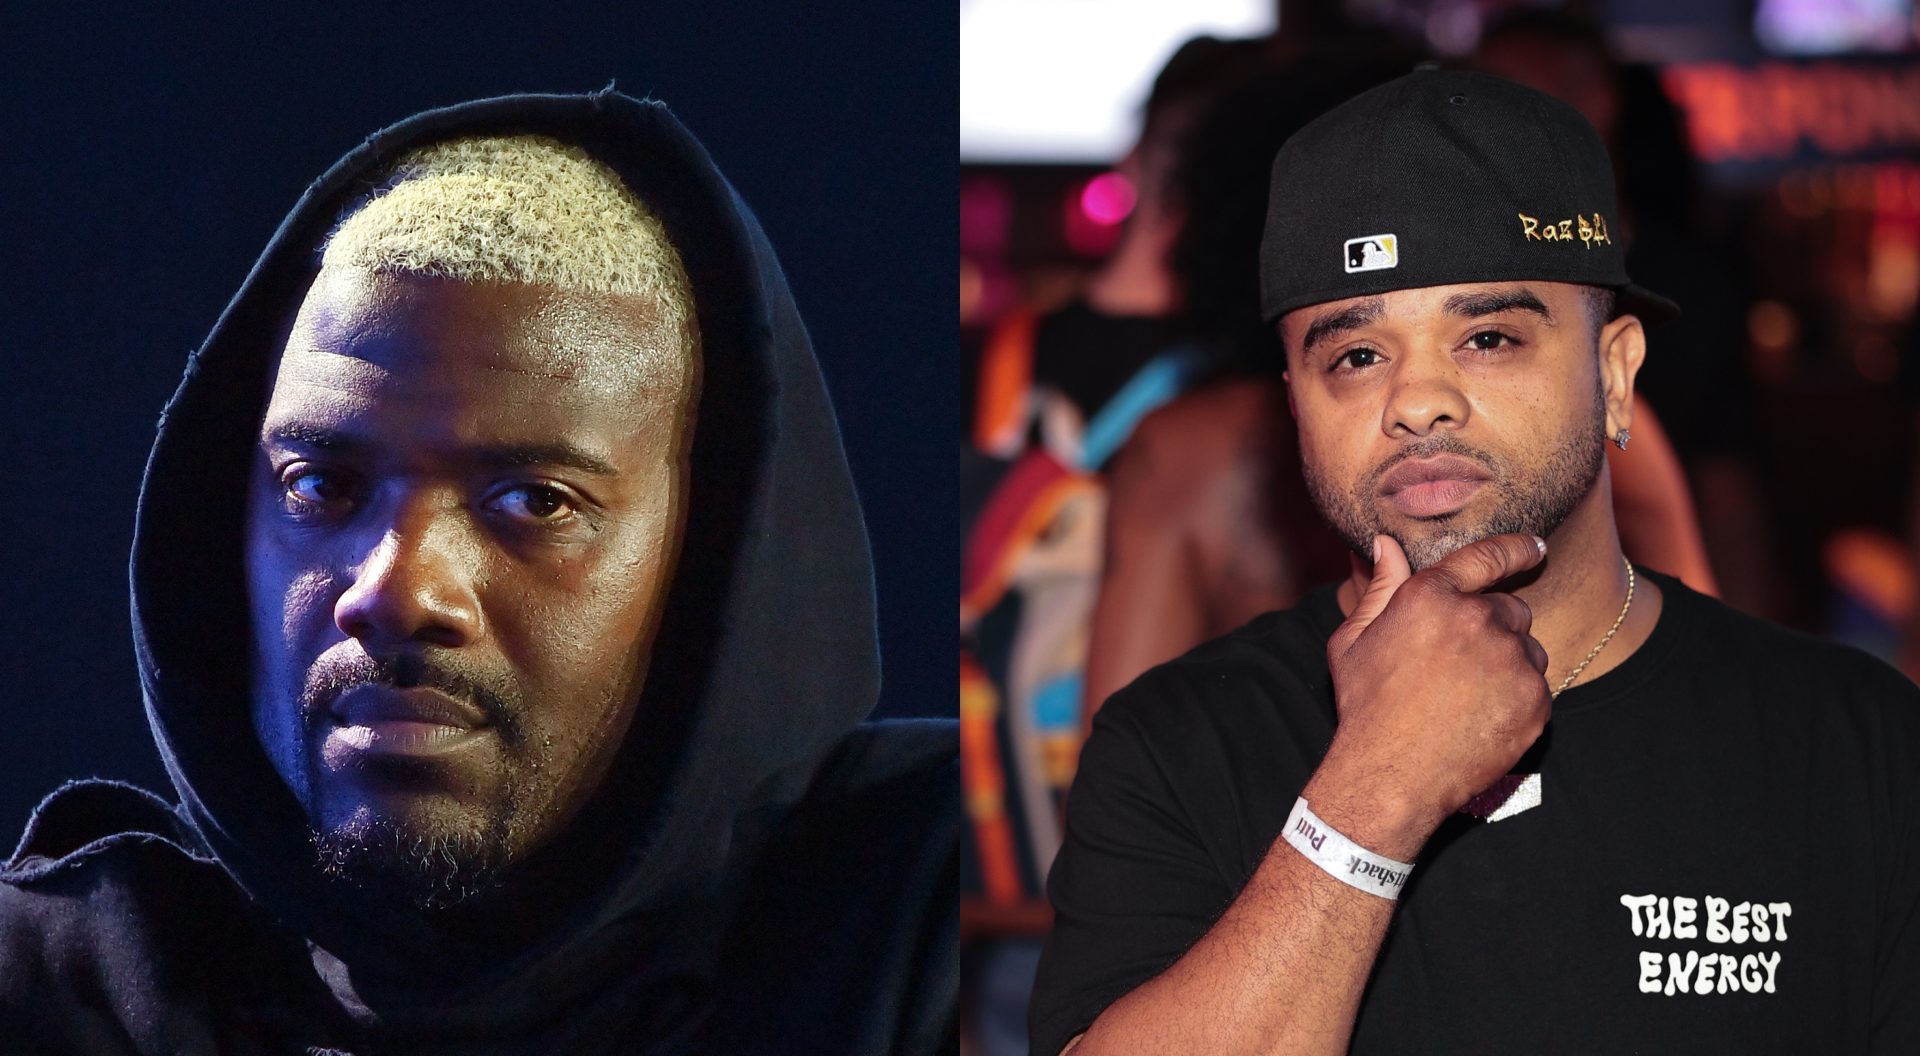 (Exclusive Details) Ray J & Raz-B Get Into Minor Scuffle Following Business Deal Disagreement 